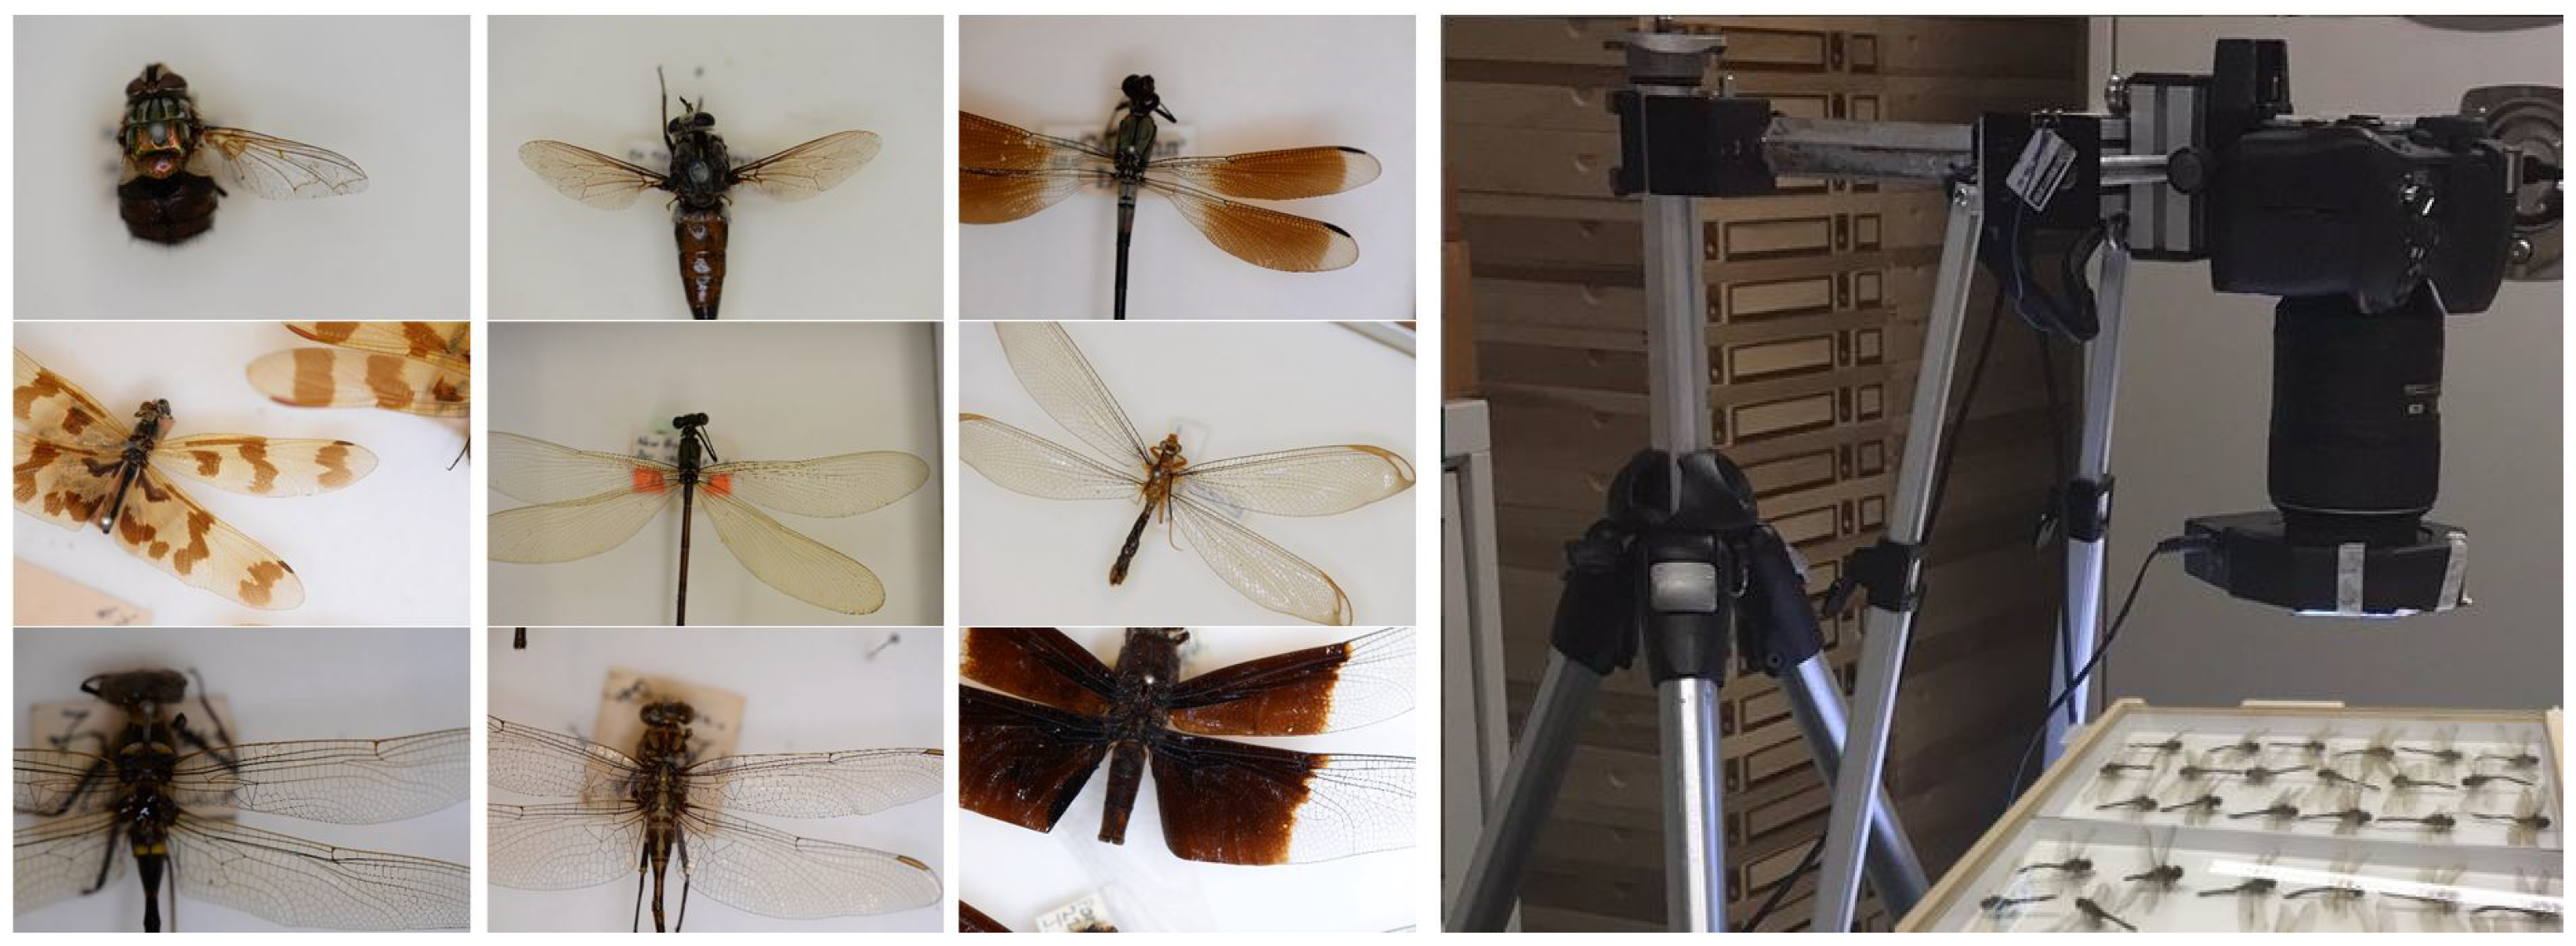 Drones | Free Full-Text | Biomimetic Drones Inspired by Dragonflies Will  Require a Systems Based Approach and Insights from Biology